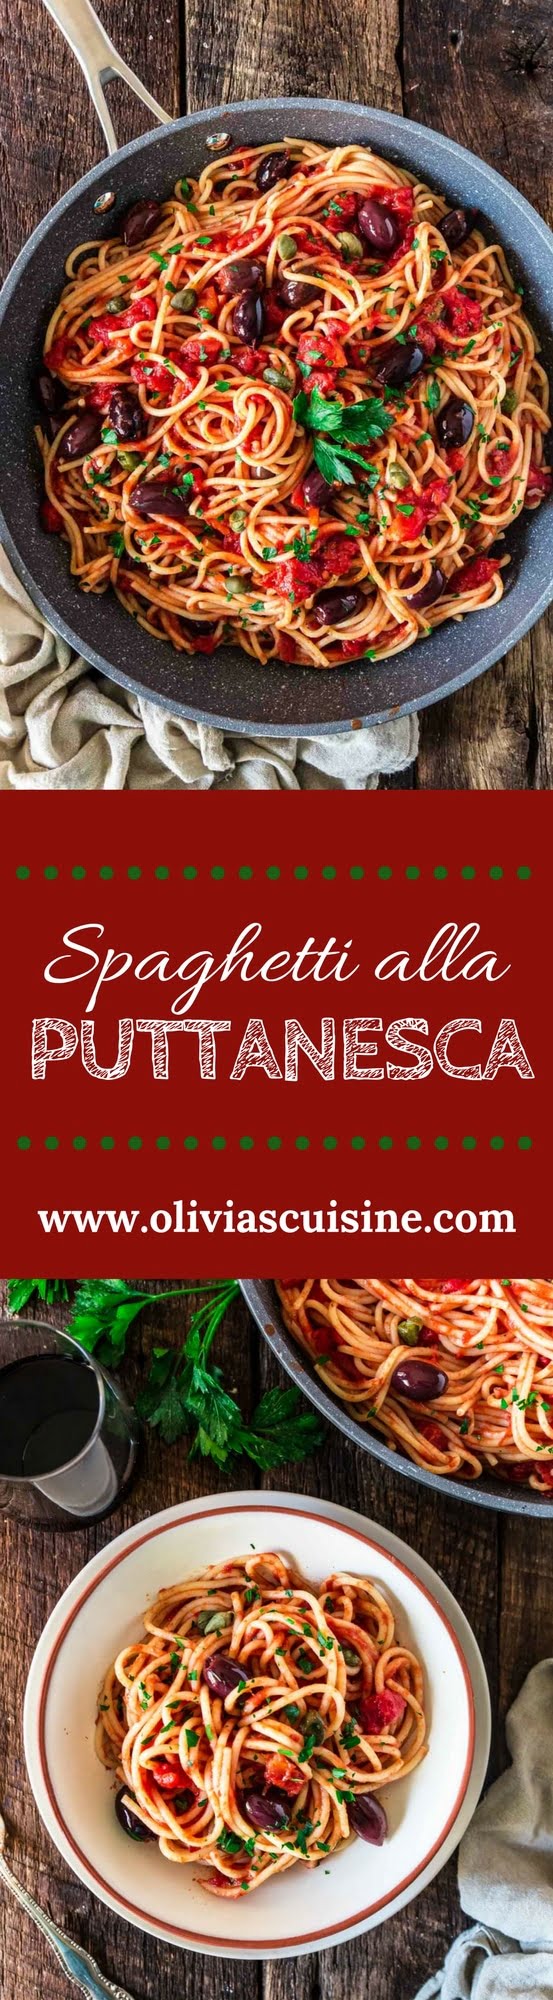 Spaghetti alla Puttanesca | www.oliviascuisine.com | Spaghetti alla Puttanesca is an Italian classic and a specialty of the Campania region. Consisting of tomatoes, garlic, olives, capers and anchovies (which are optional in my version), this dish is quick, deliciously aromatic and on the table in 20 minutes! (Recipe by @oliviascuisine.)